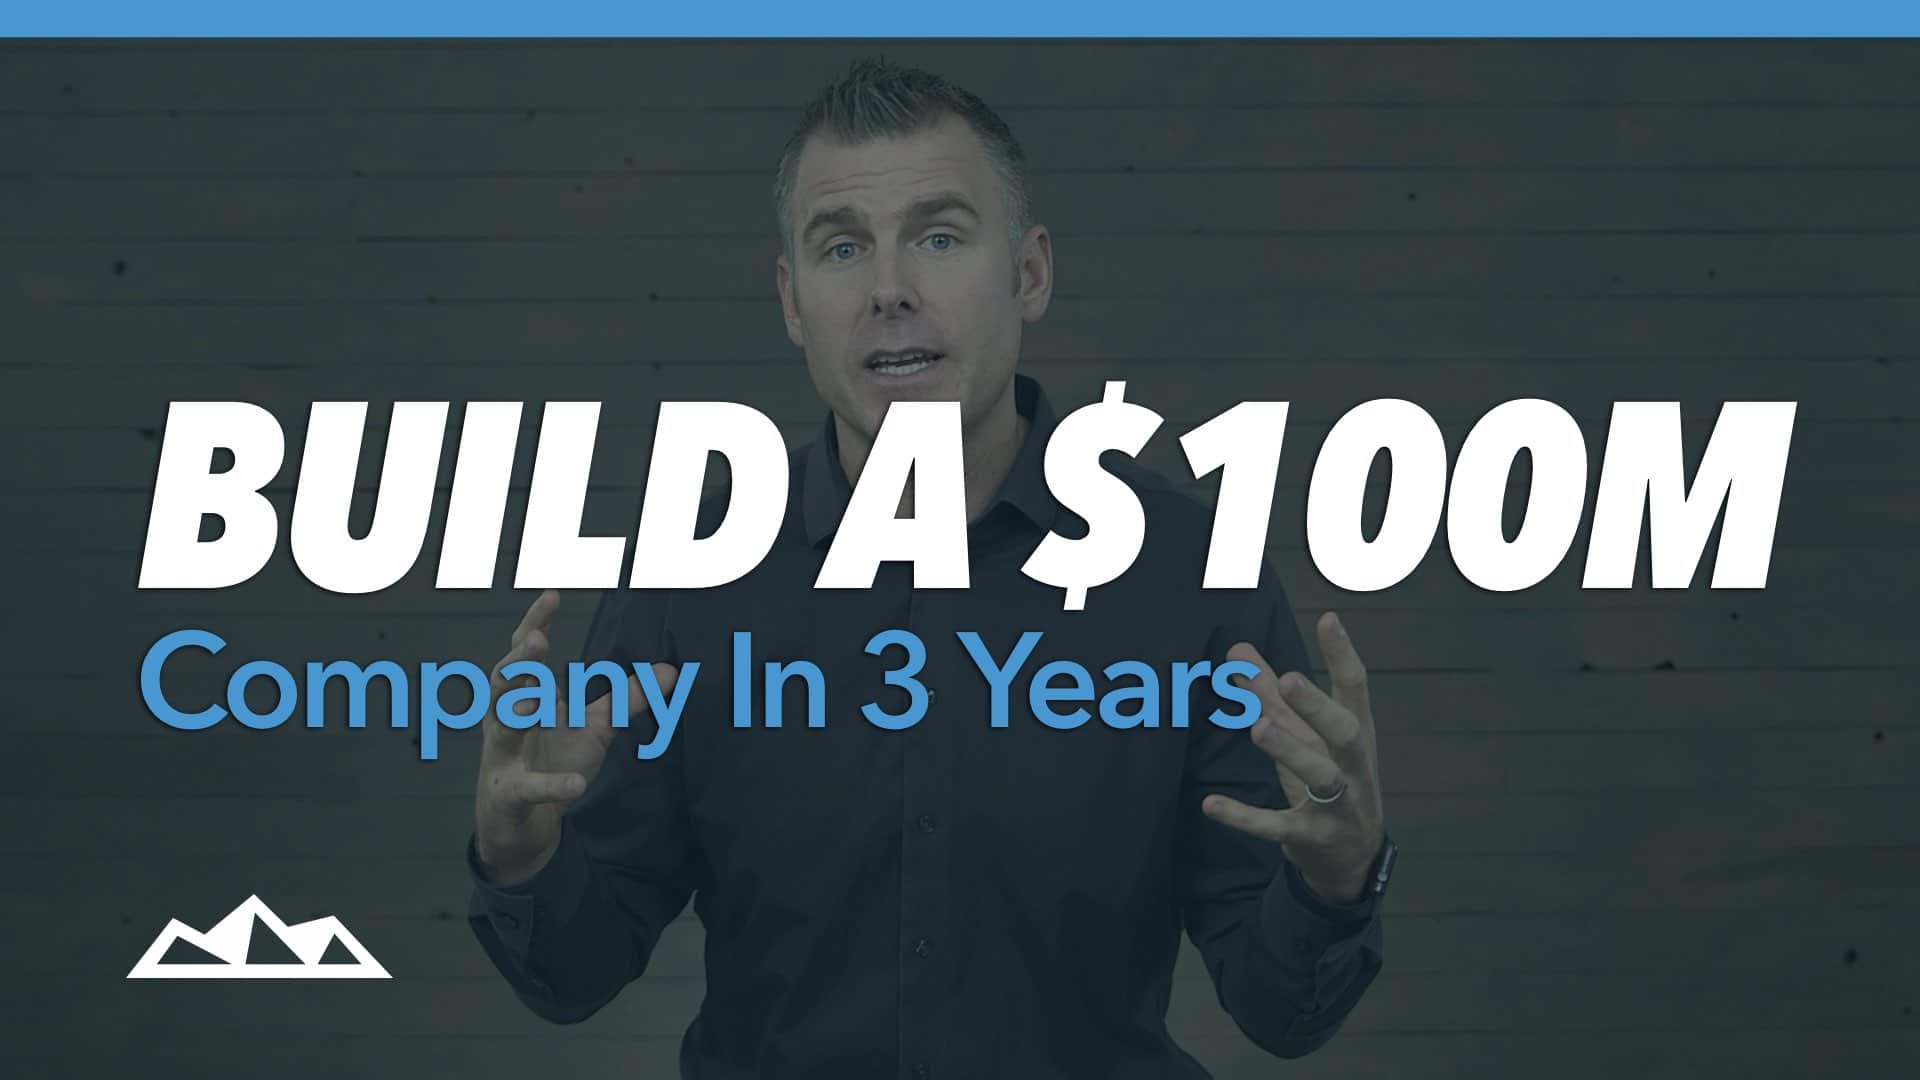 4 Characteristics of Building A 100M Dollar Startup In 3 Years